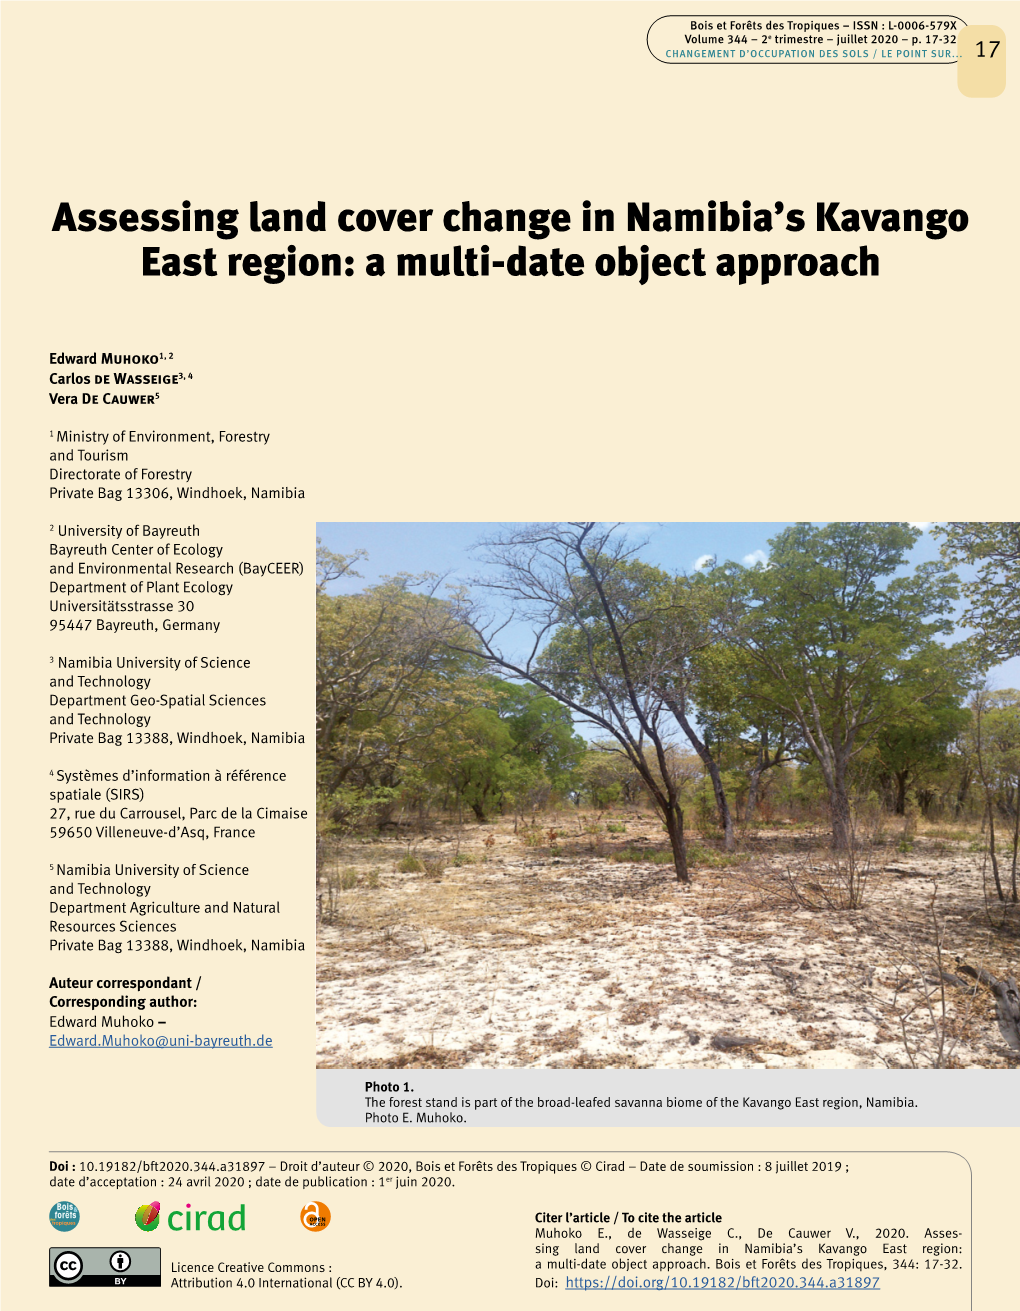 Assessing Land Cover Change in Namibia's Kavango East Region: A